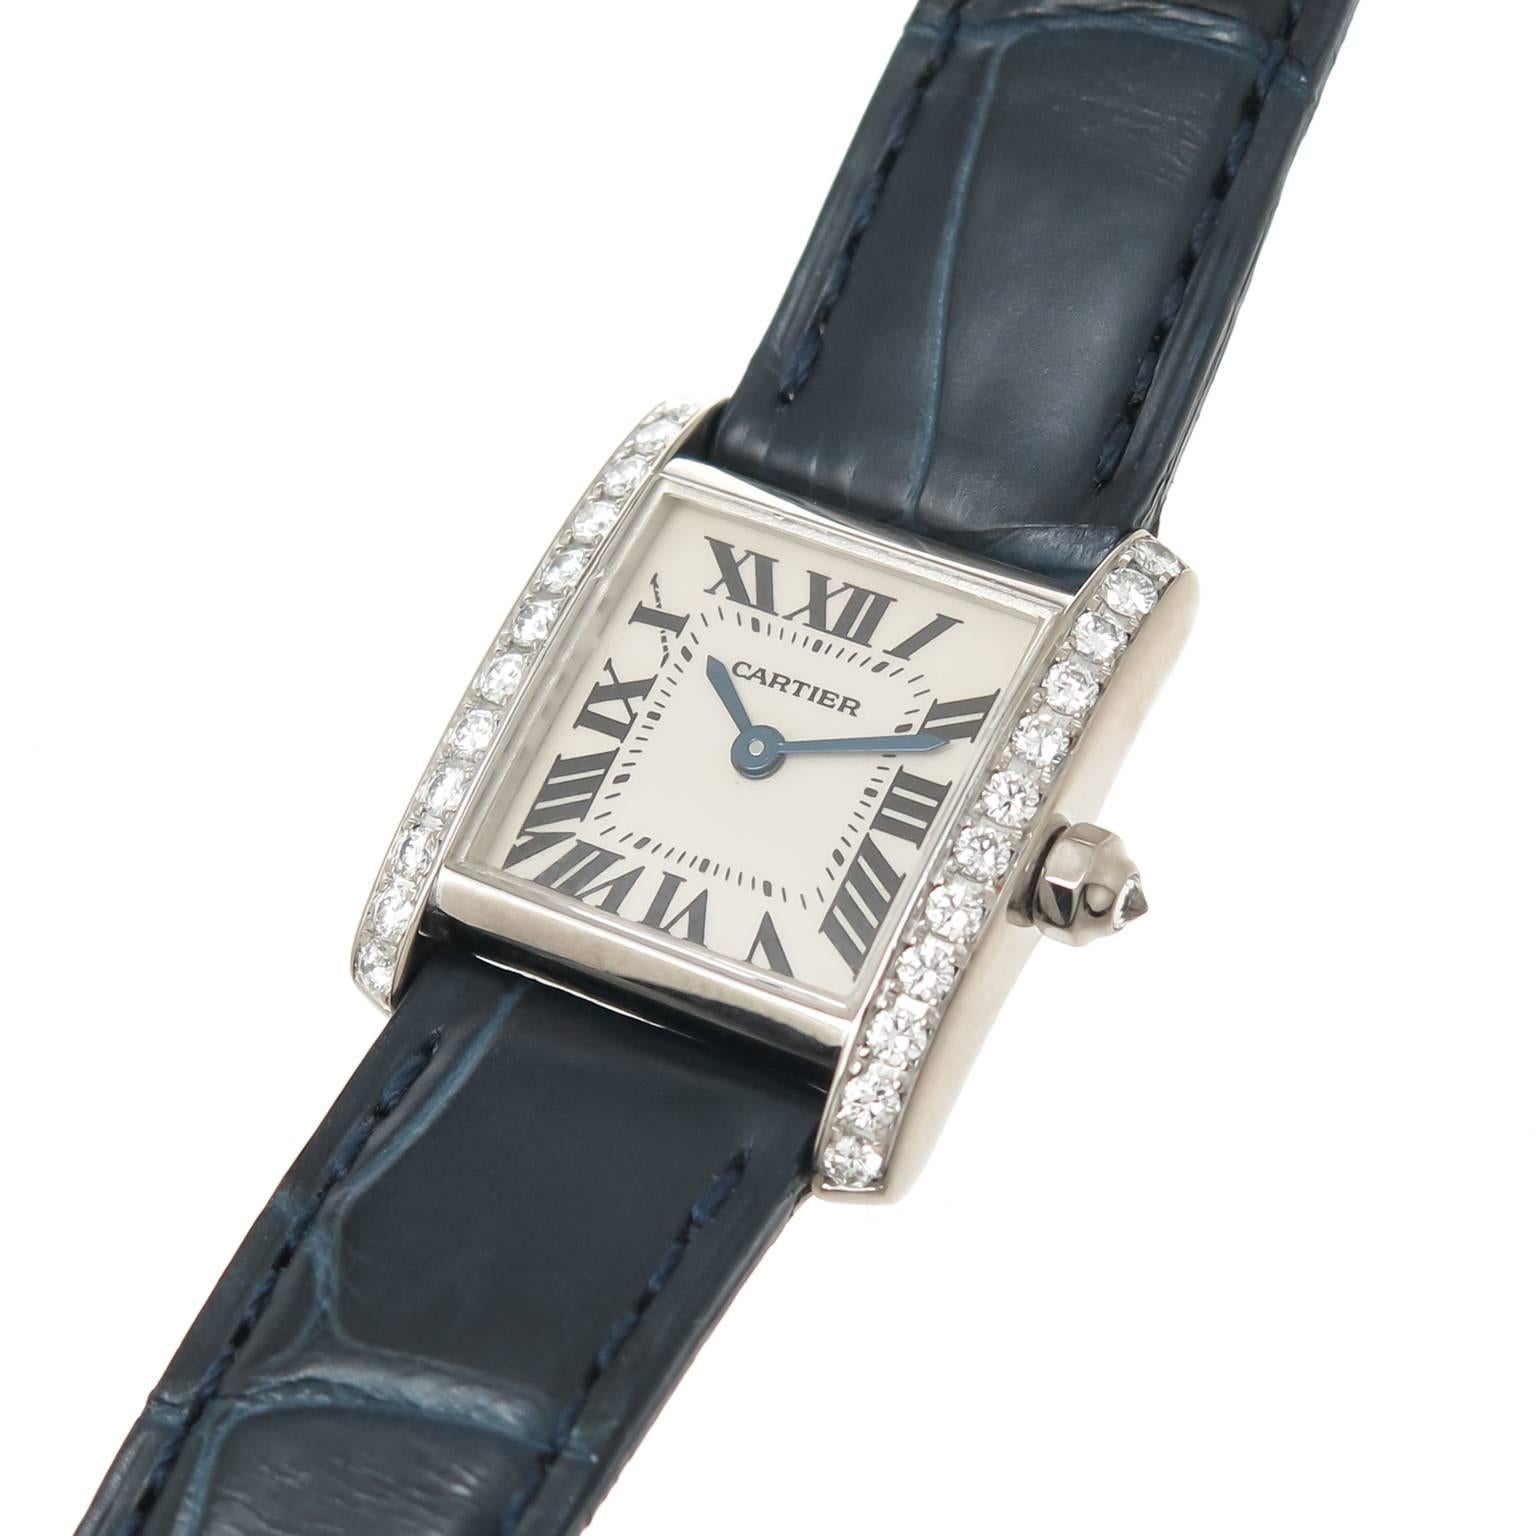 Circa 2010 Cartier Tank Francaise,18K White Gold 24 X 20 MM water resistant case.Factory Diamond set bezel totaling approximately 1 Carat and a Diamond set Crown. Quartz Movement, white Dial with Black Roman numerals, scratch resistant crystal. New